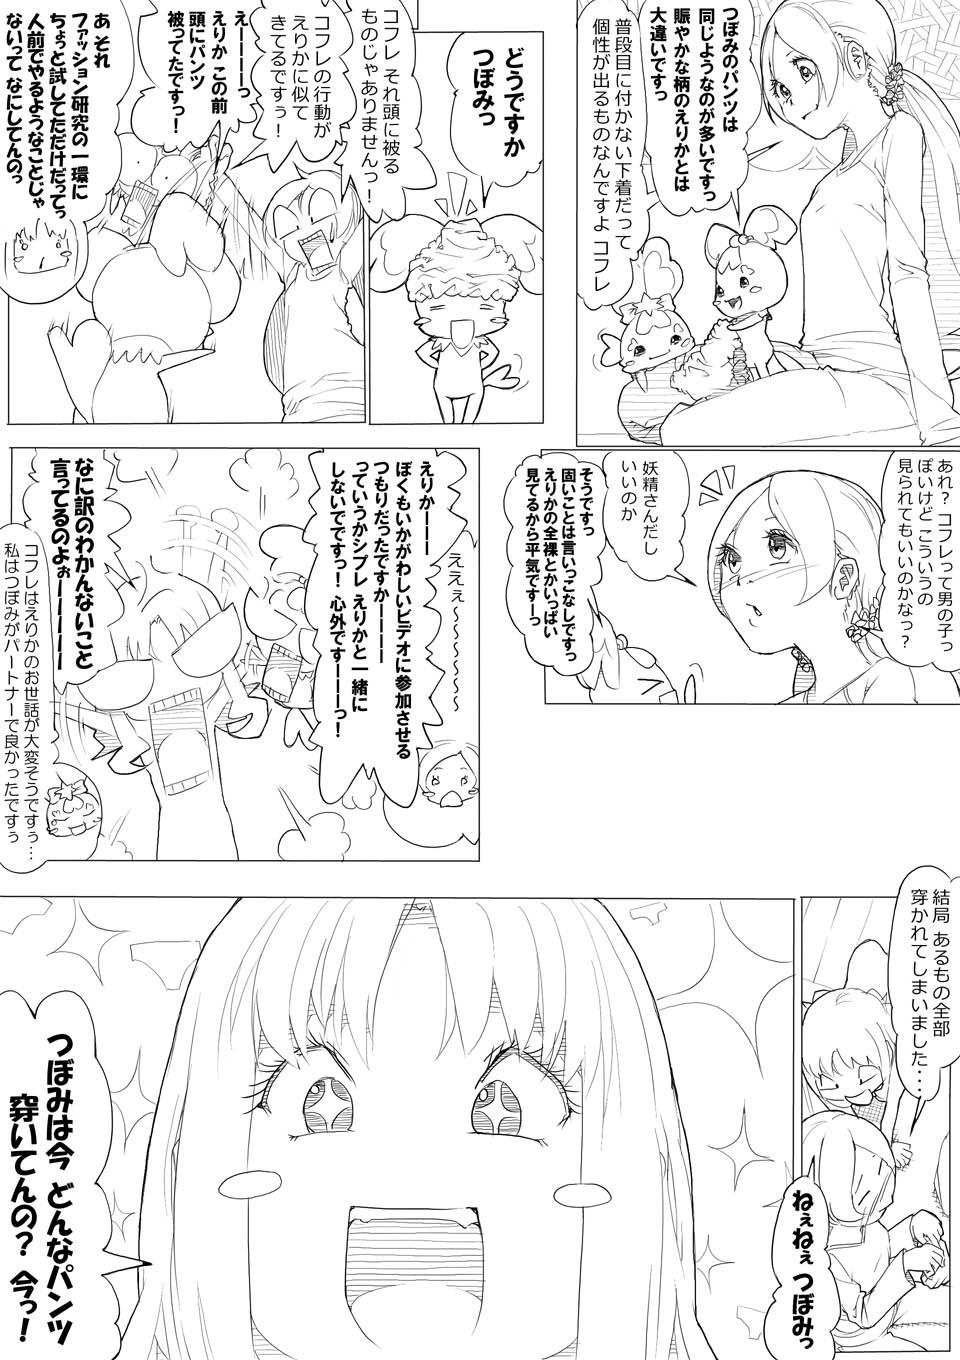 Old ハトプリ - Heartcatch precure Anal Sex - Page 10